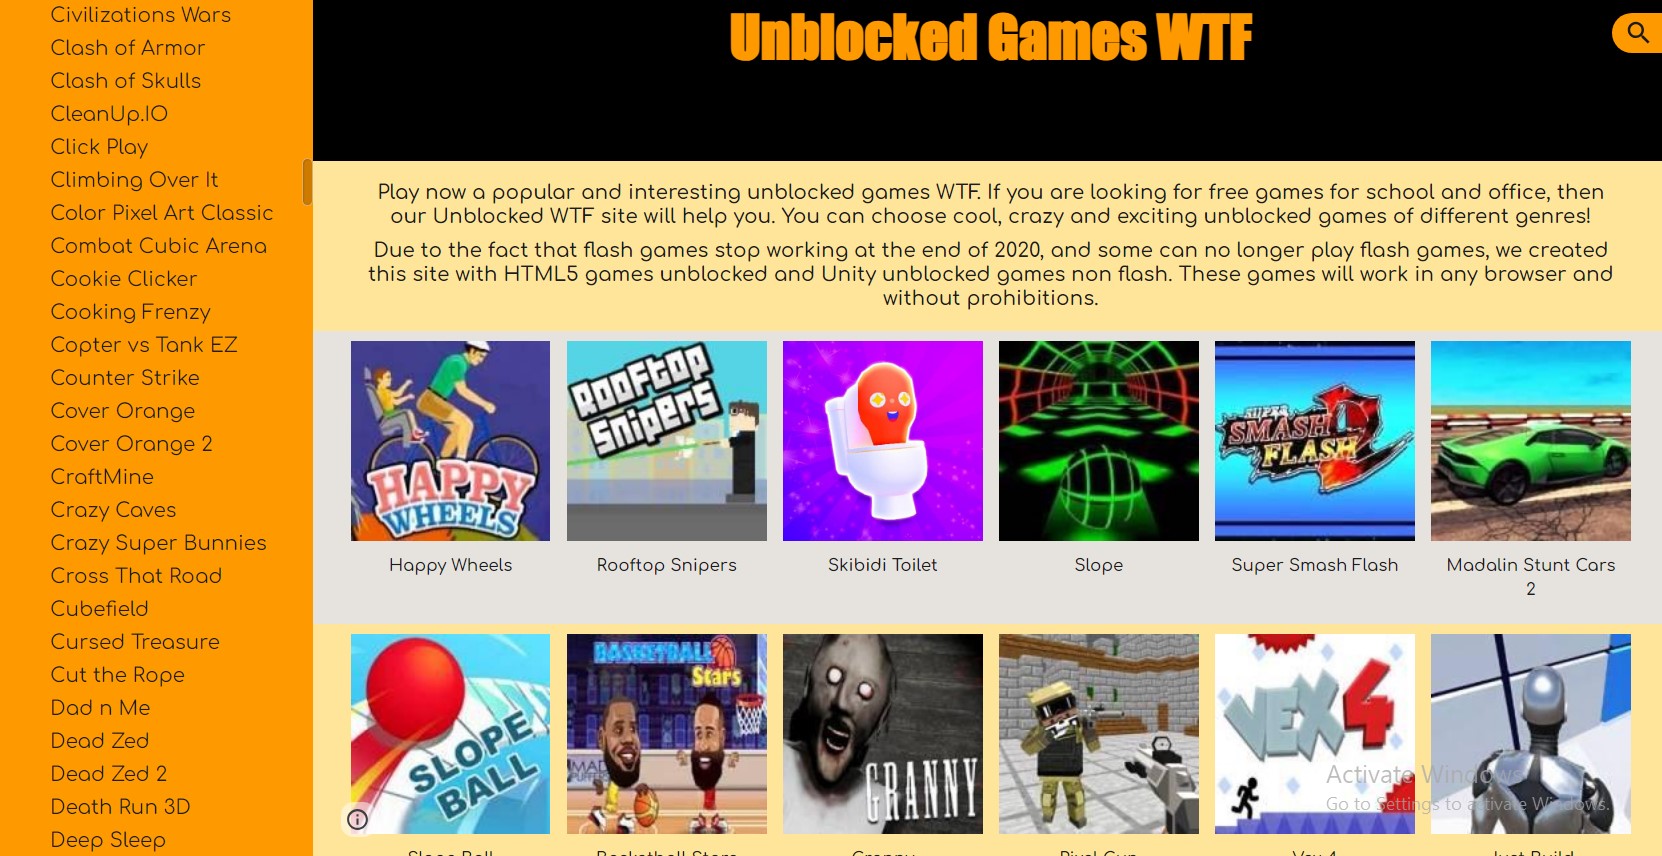 How to Play Games Online Without Being Blocked: The WTF Guide to